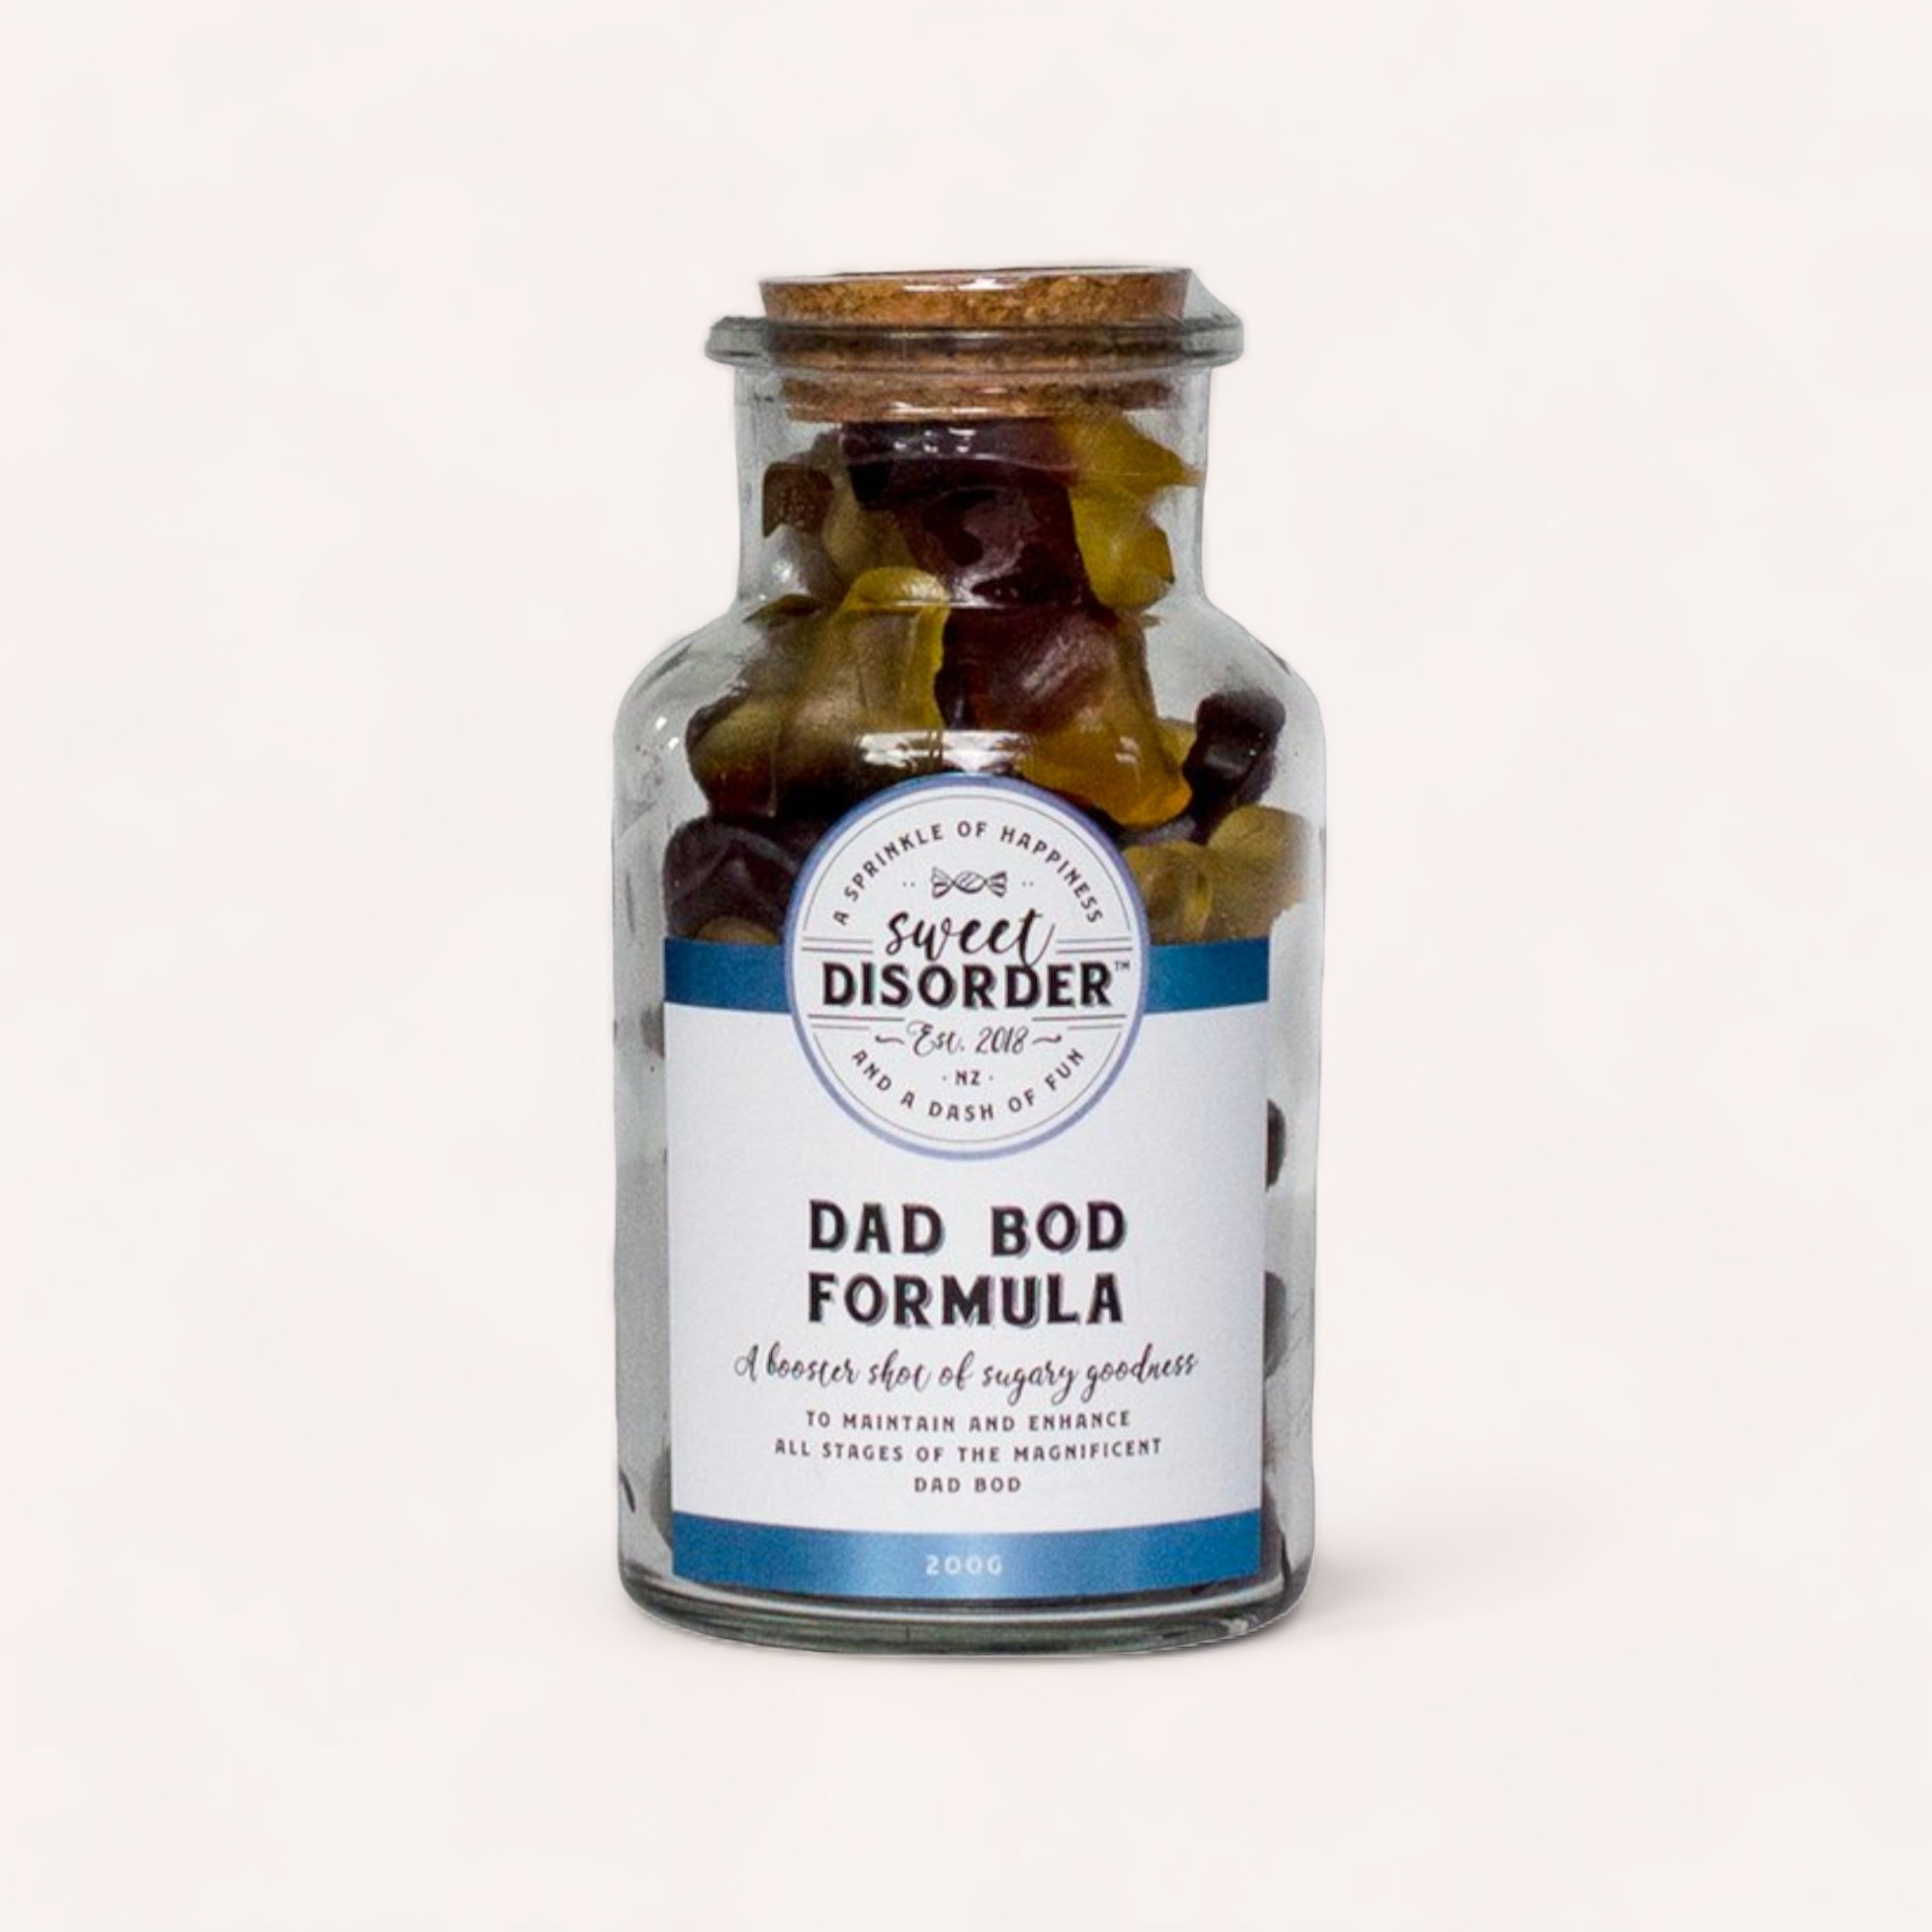 A jar of "Dad Bod Formula" cola flavoured gummies by Sweet Disorder with a humorous label, presented as an amusing novelty item.